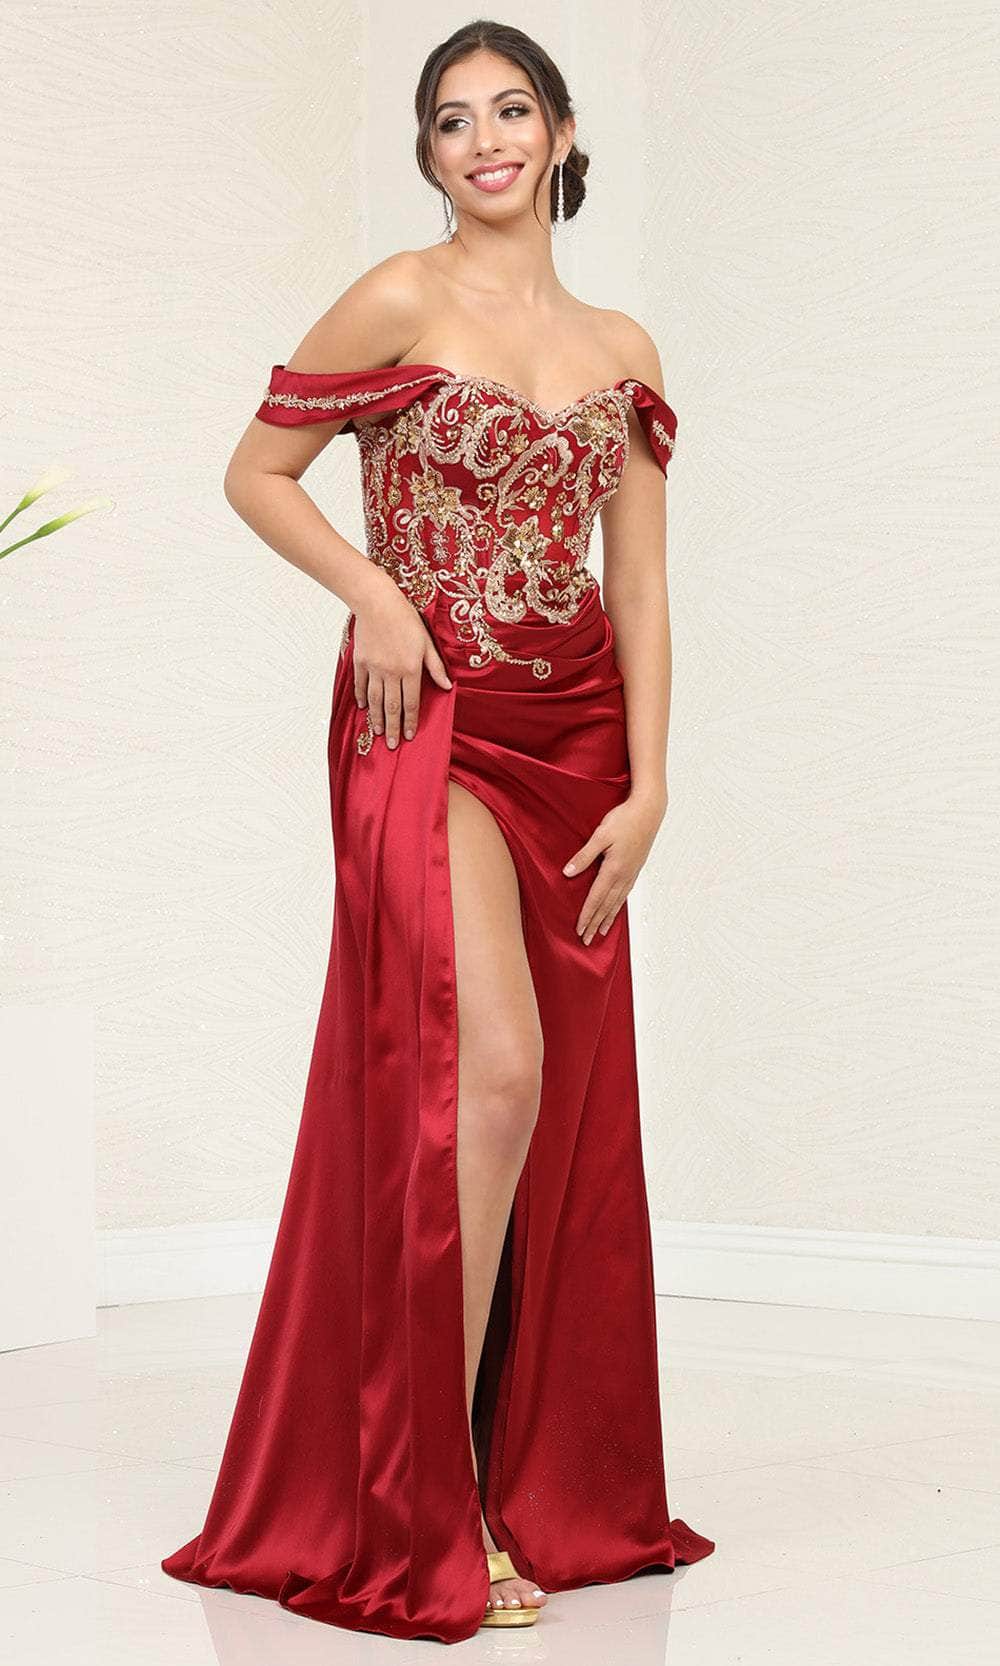 May Queen RQ8055 - Draped Cap Sleeve Prom Gown Evening Dresses 4 / Burgundy